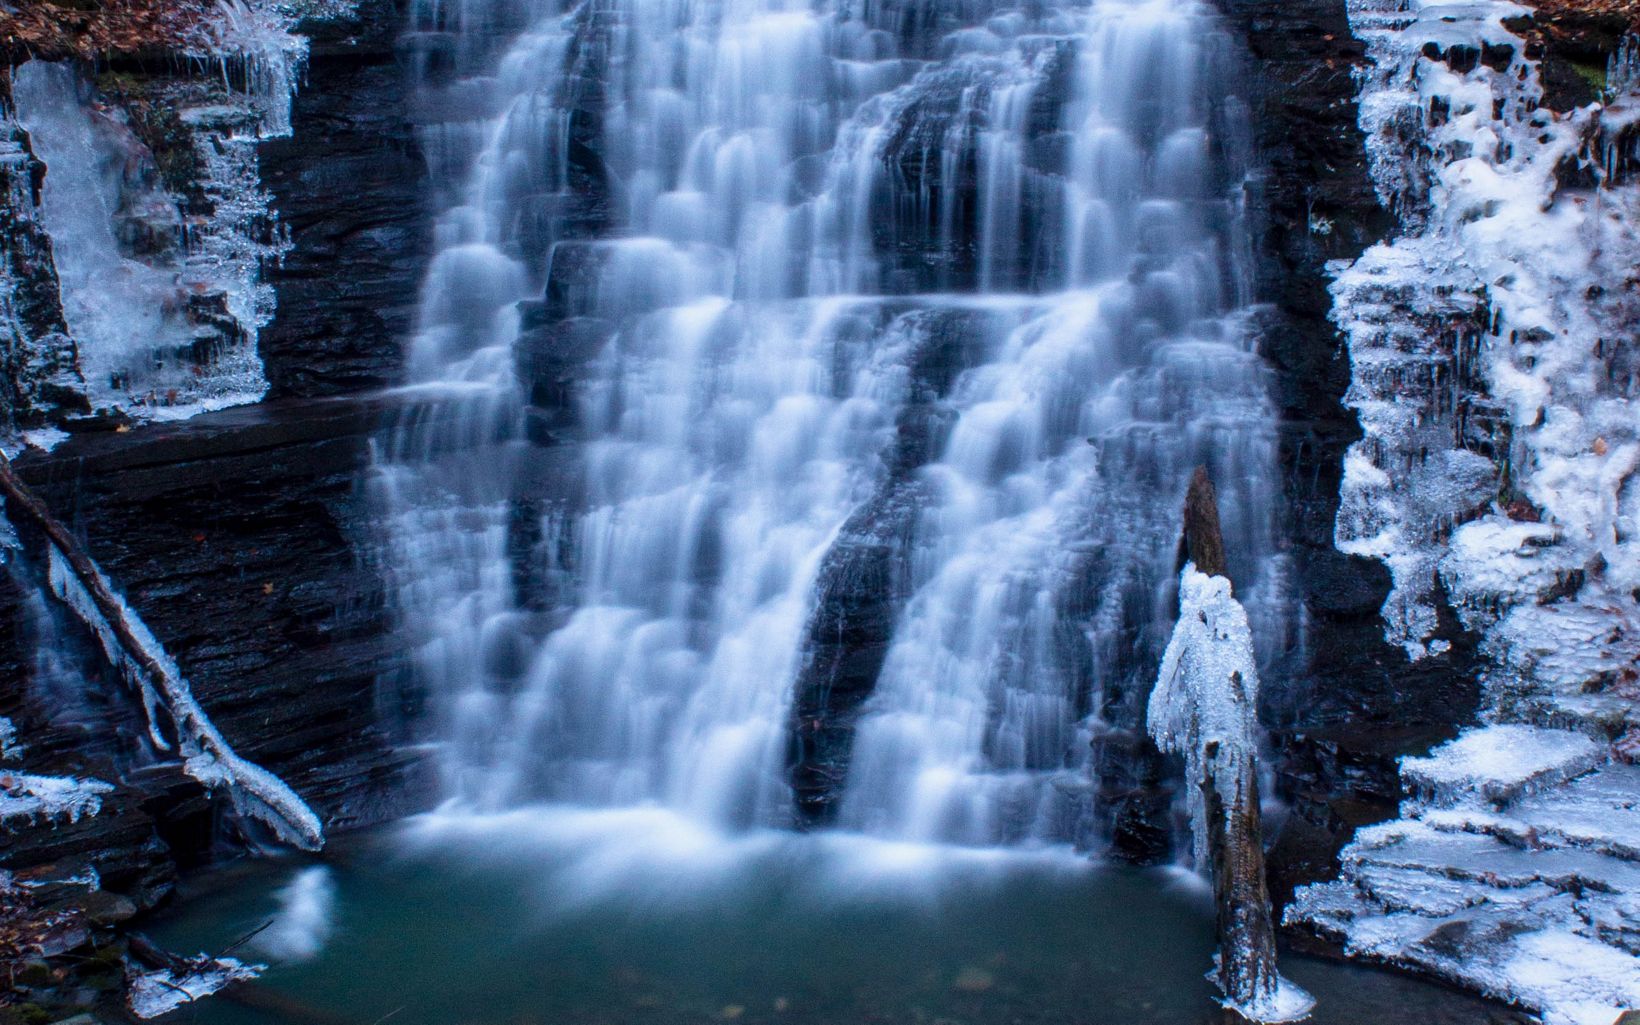 Waterfall with frozen ice on surrounding rocks.